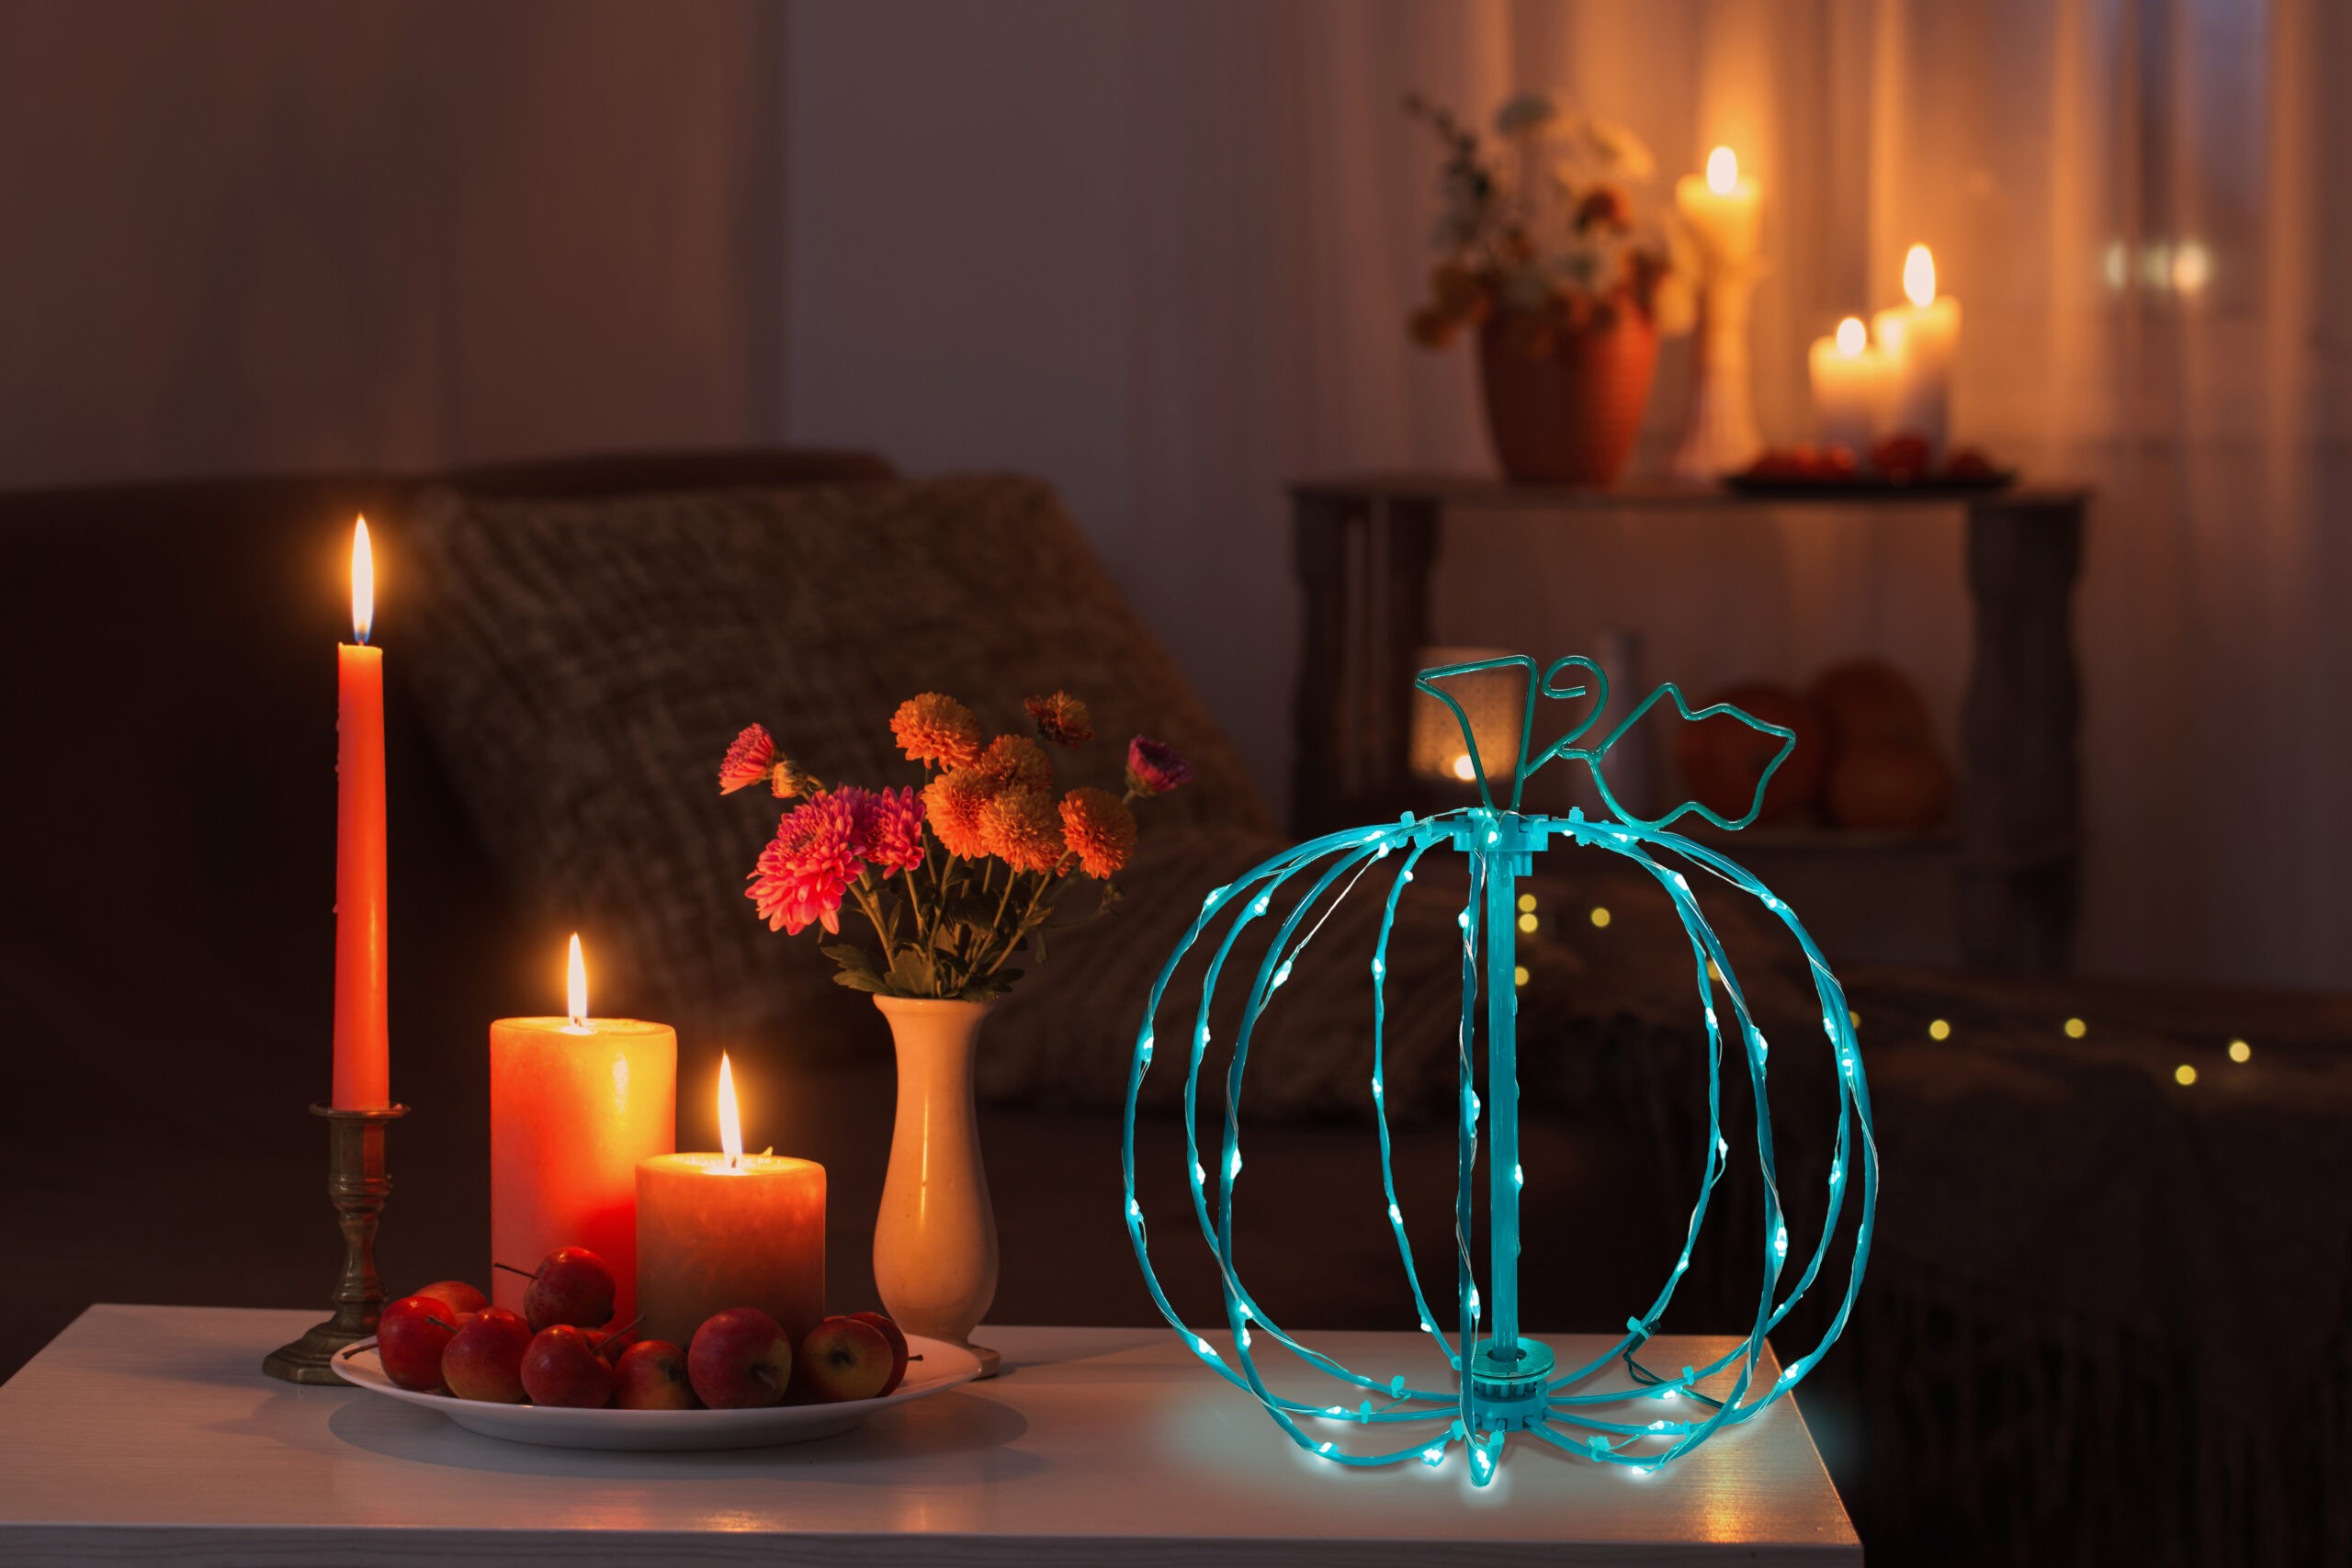 10IN SPOOKY TOWN 3D WIRE DÉCOR TEAL LIGHTS AC/TINY LITES ON/OFF PUMPKIN